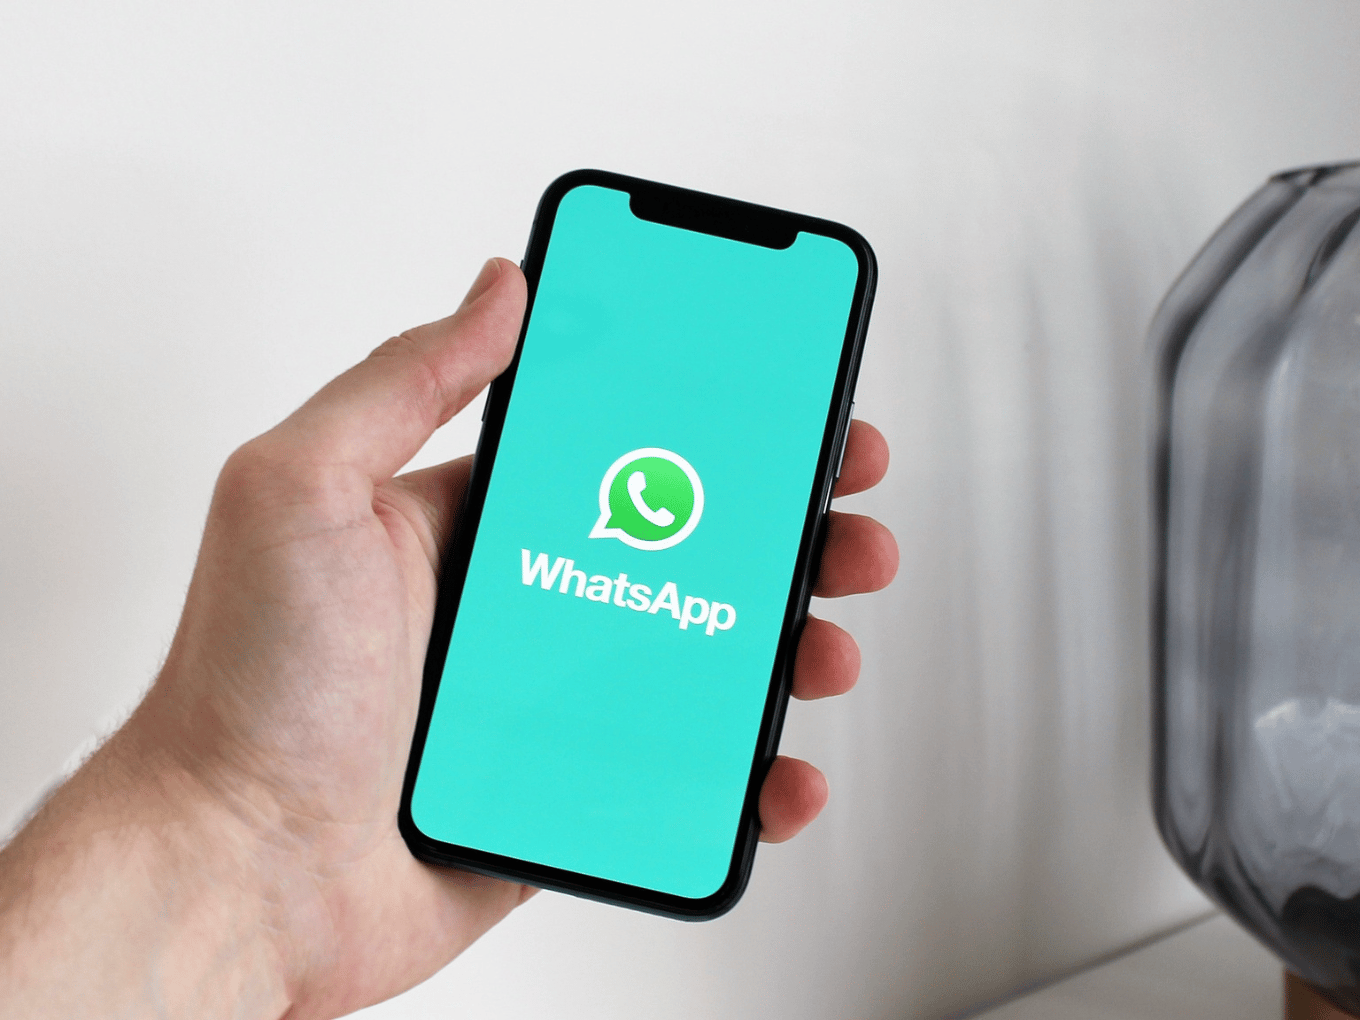 WhatsApp Data Breach: Nearly 500 Mn Users’ Phone Numbers At Risk - Inc42 (Picture 1)